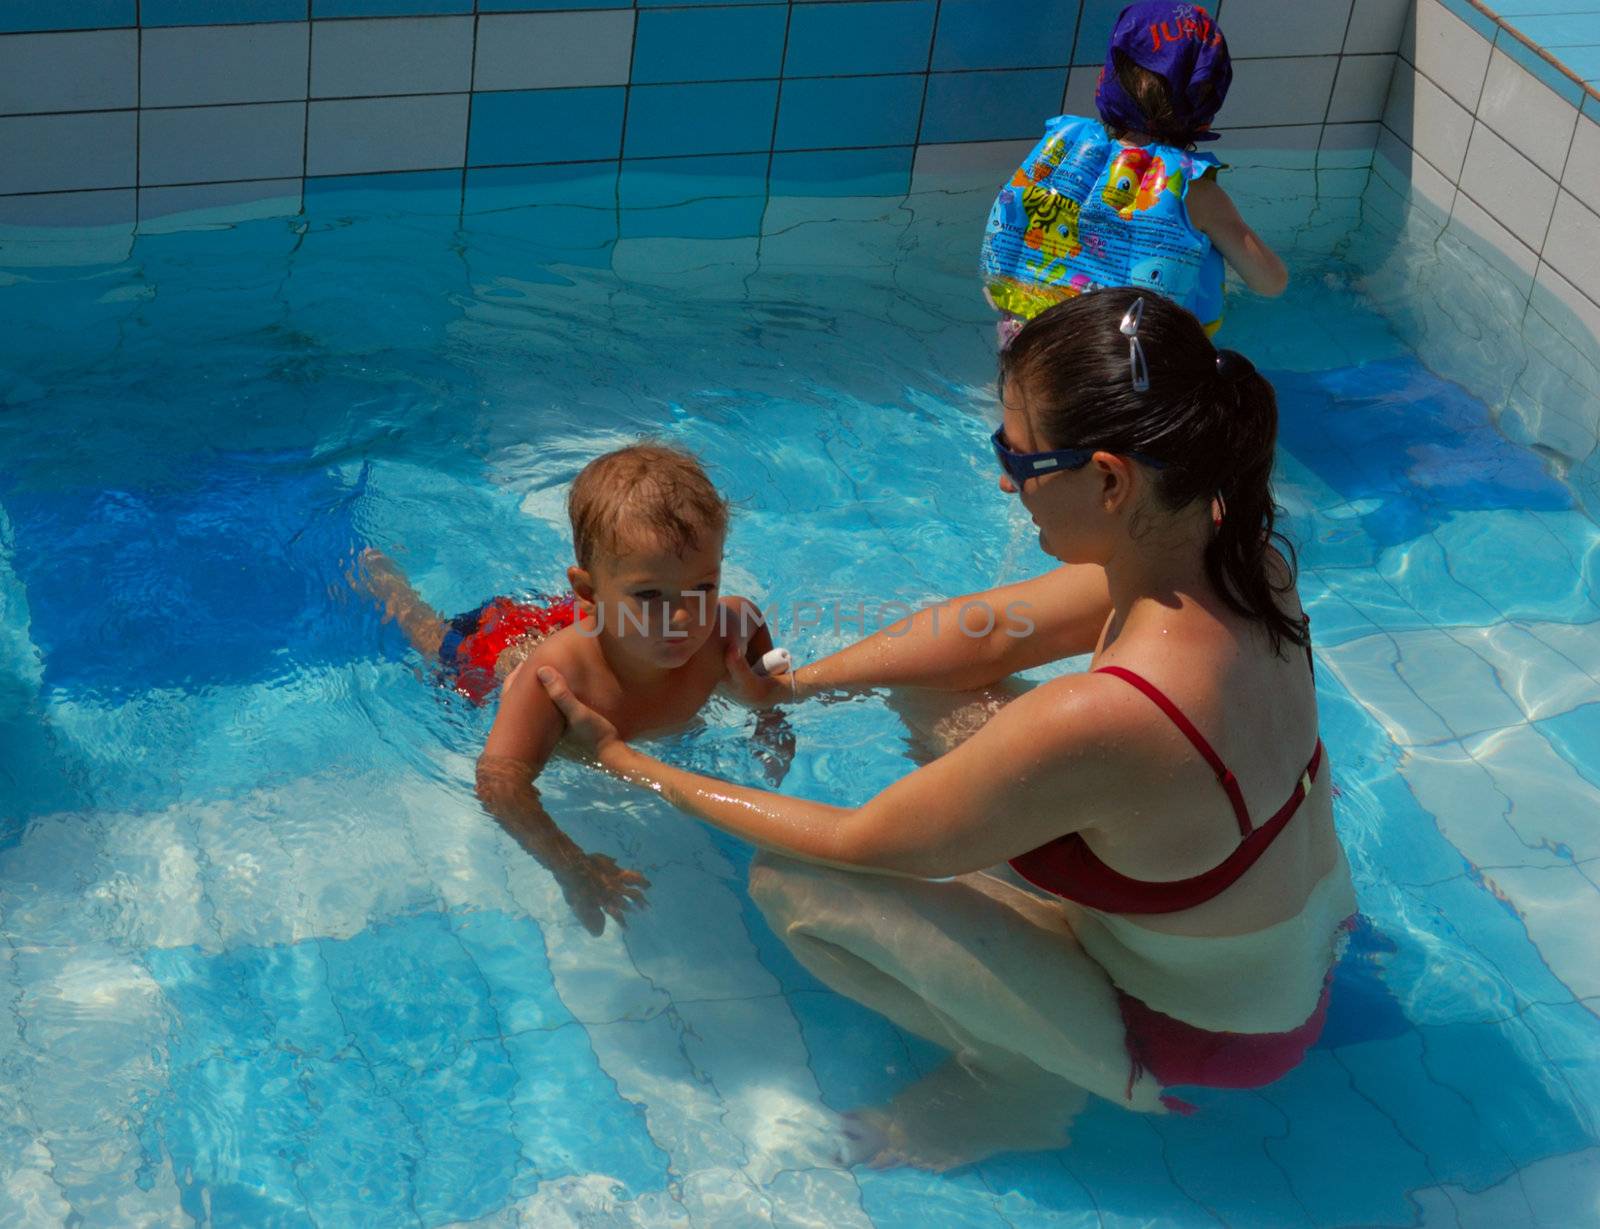 mother and little son at swimming pool having fun